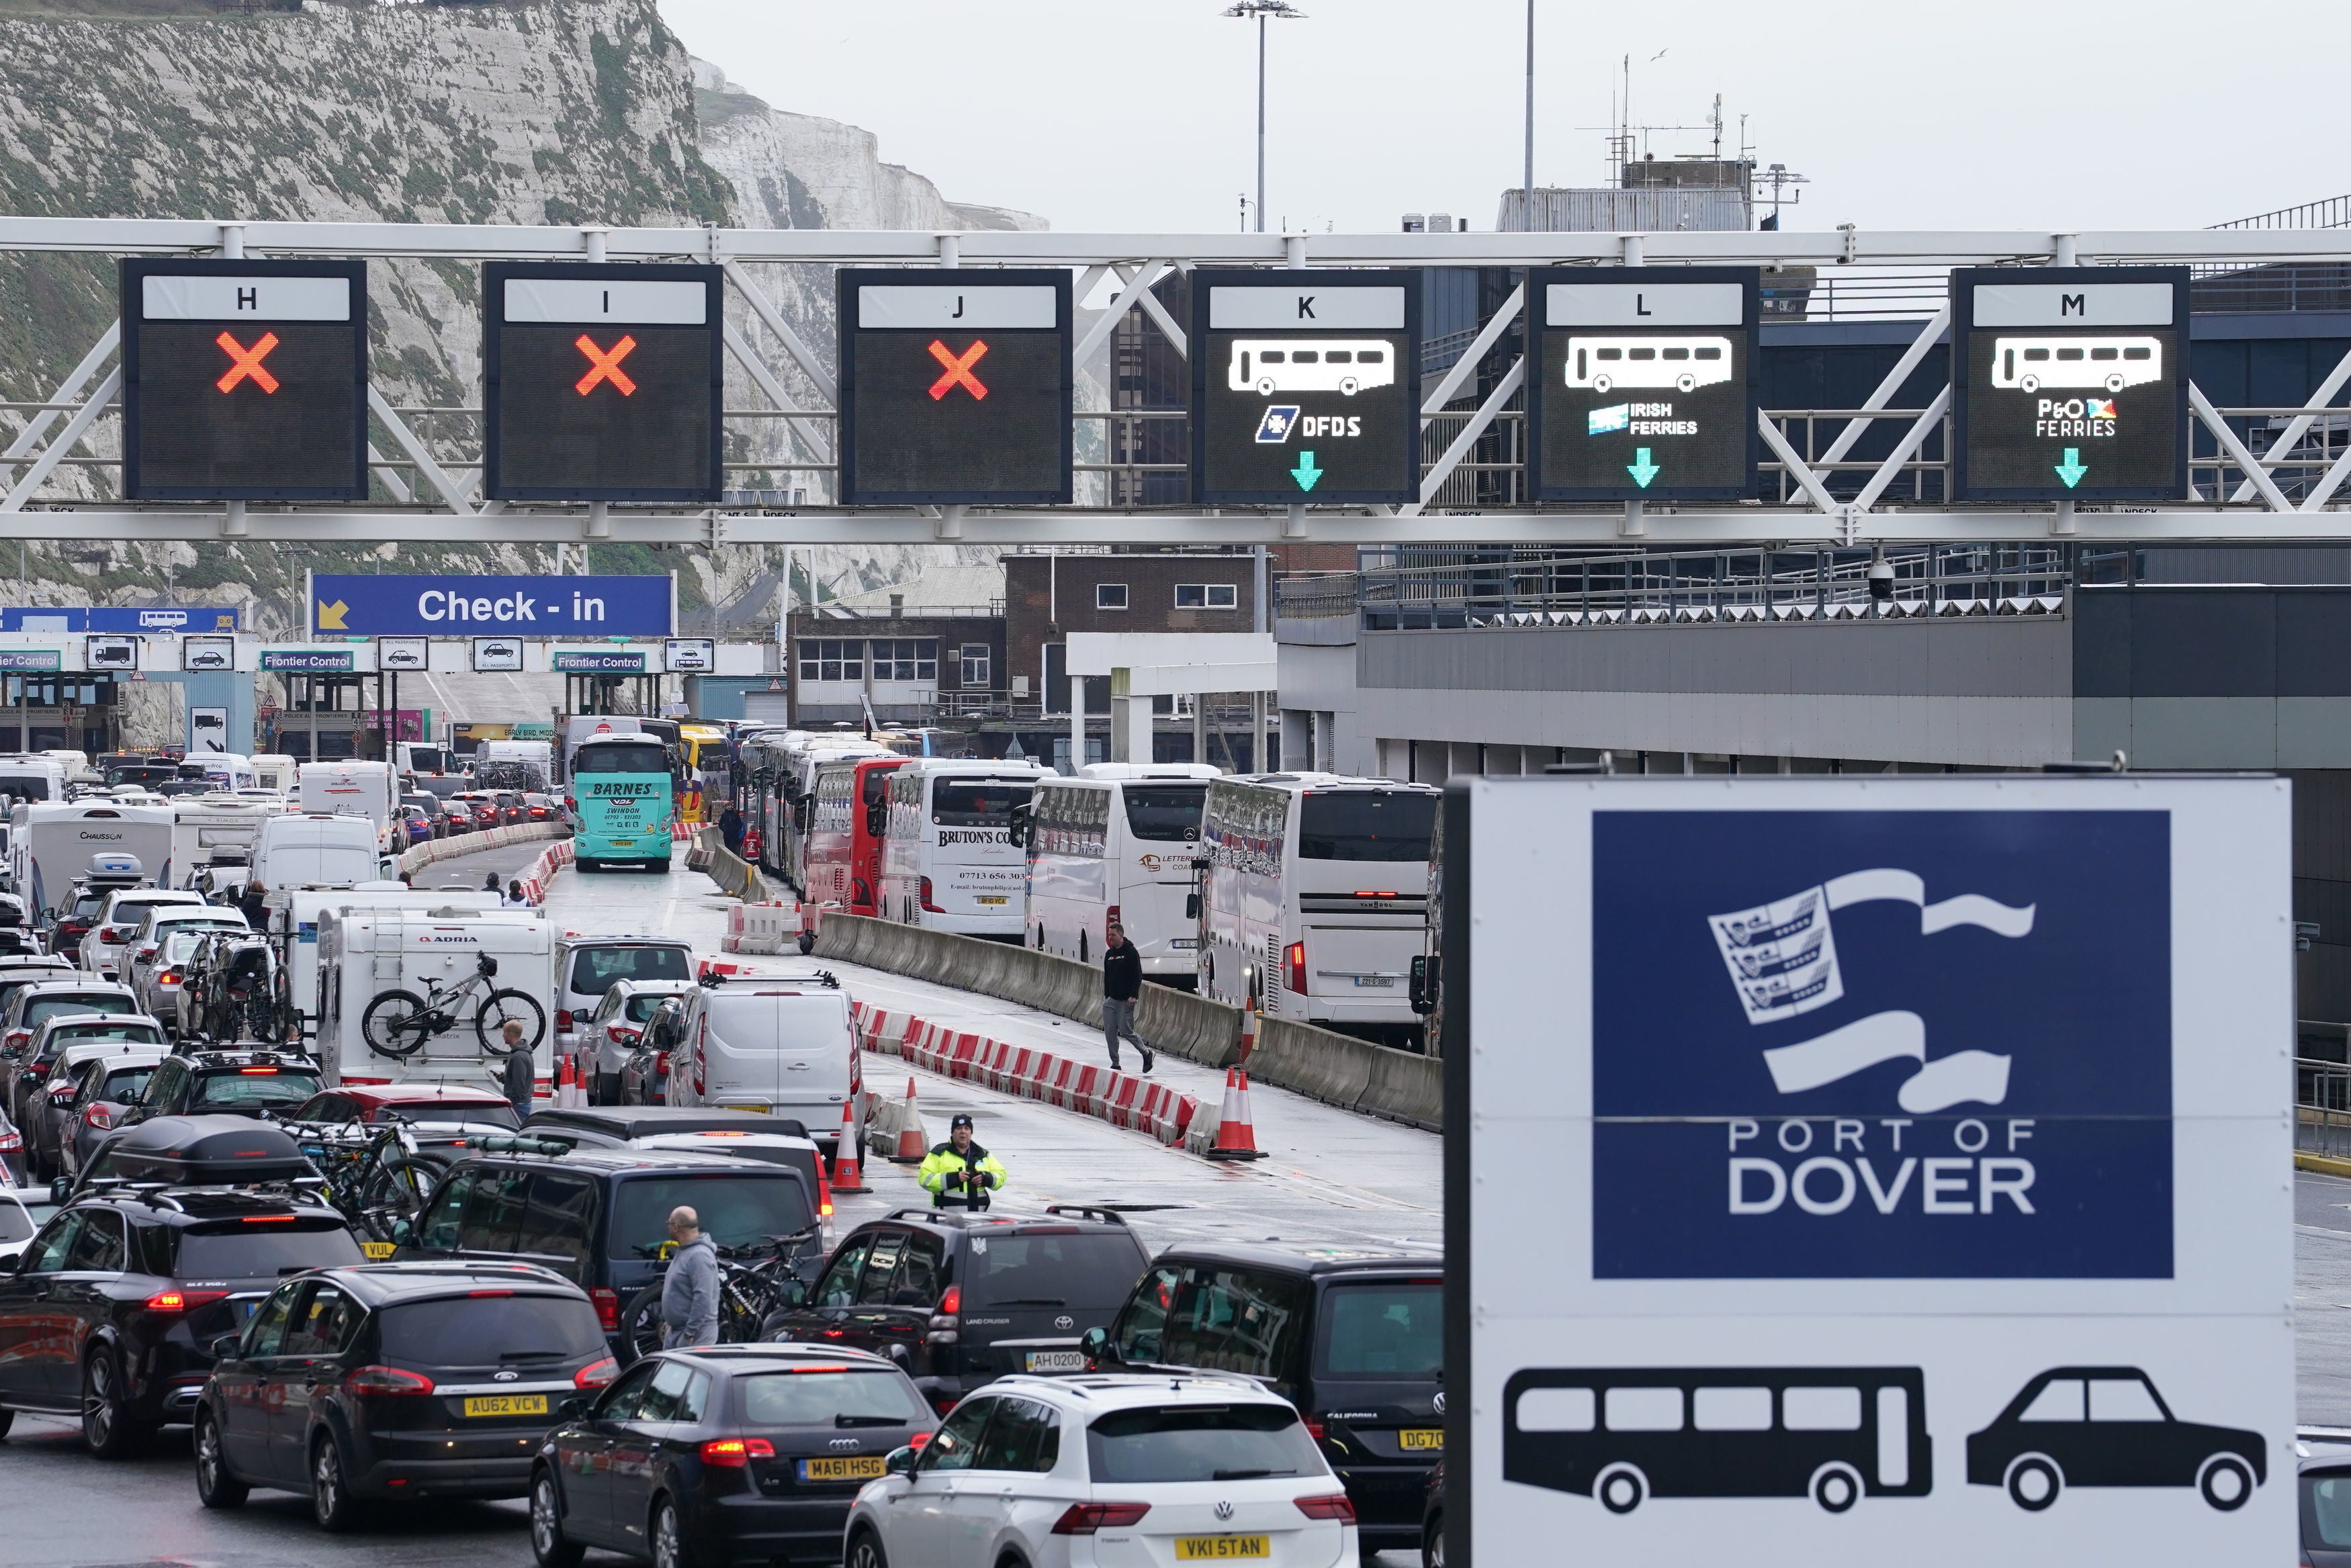 Holiday gridlock: the scene at the Port on Sunday